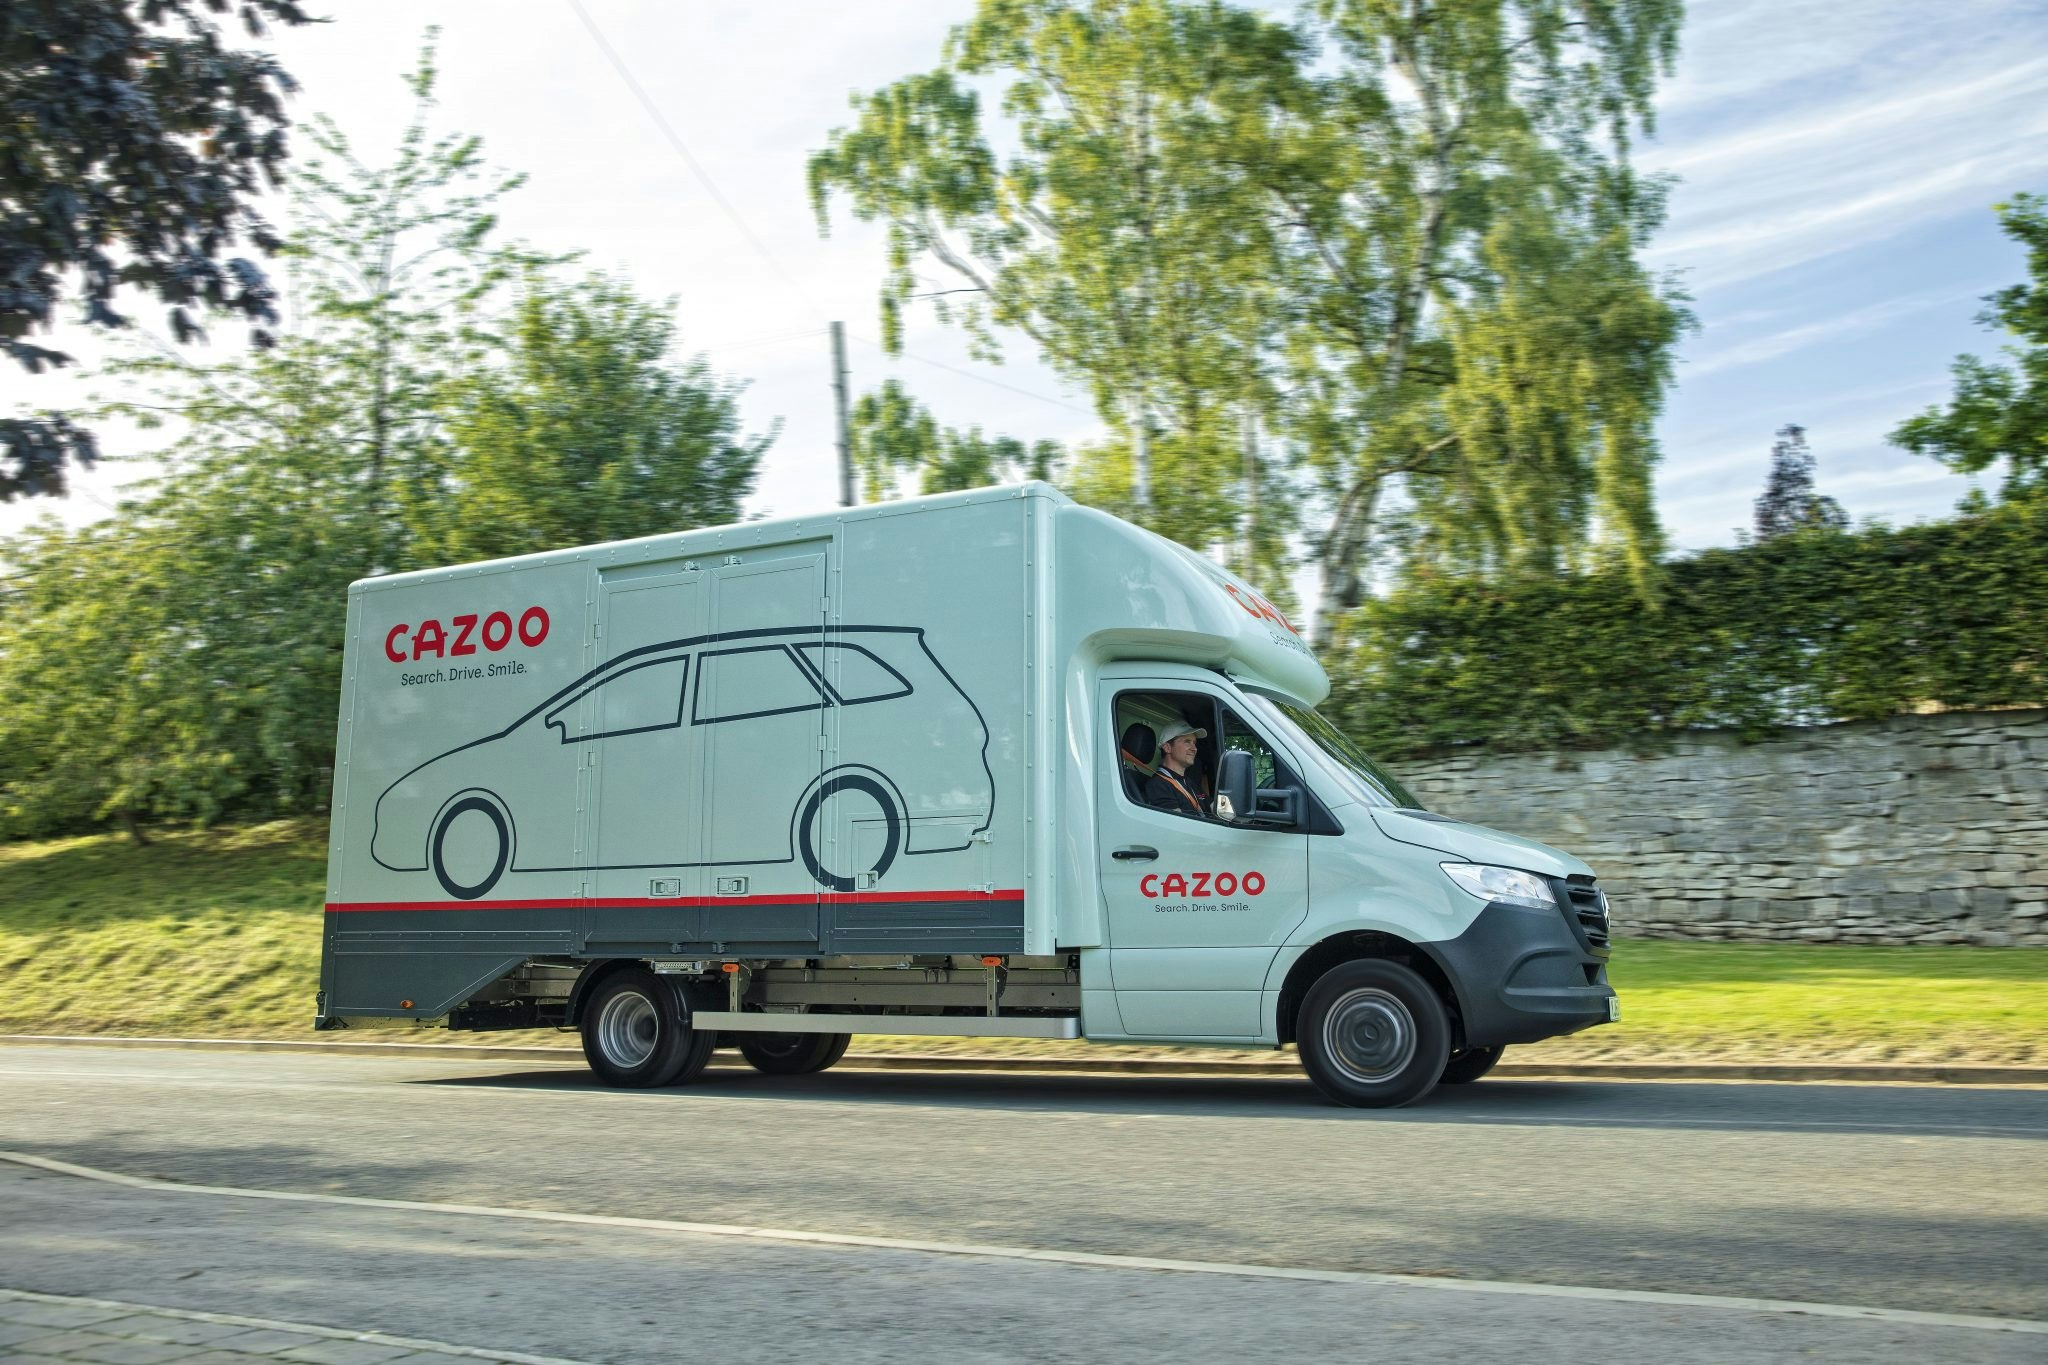 Photo of a Cazoo delivery vehicle.